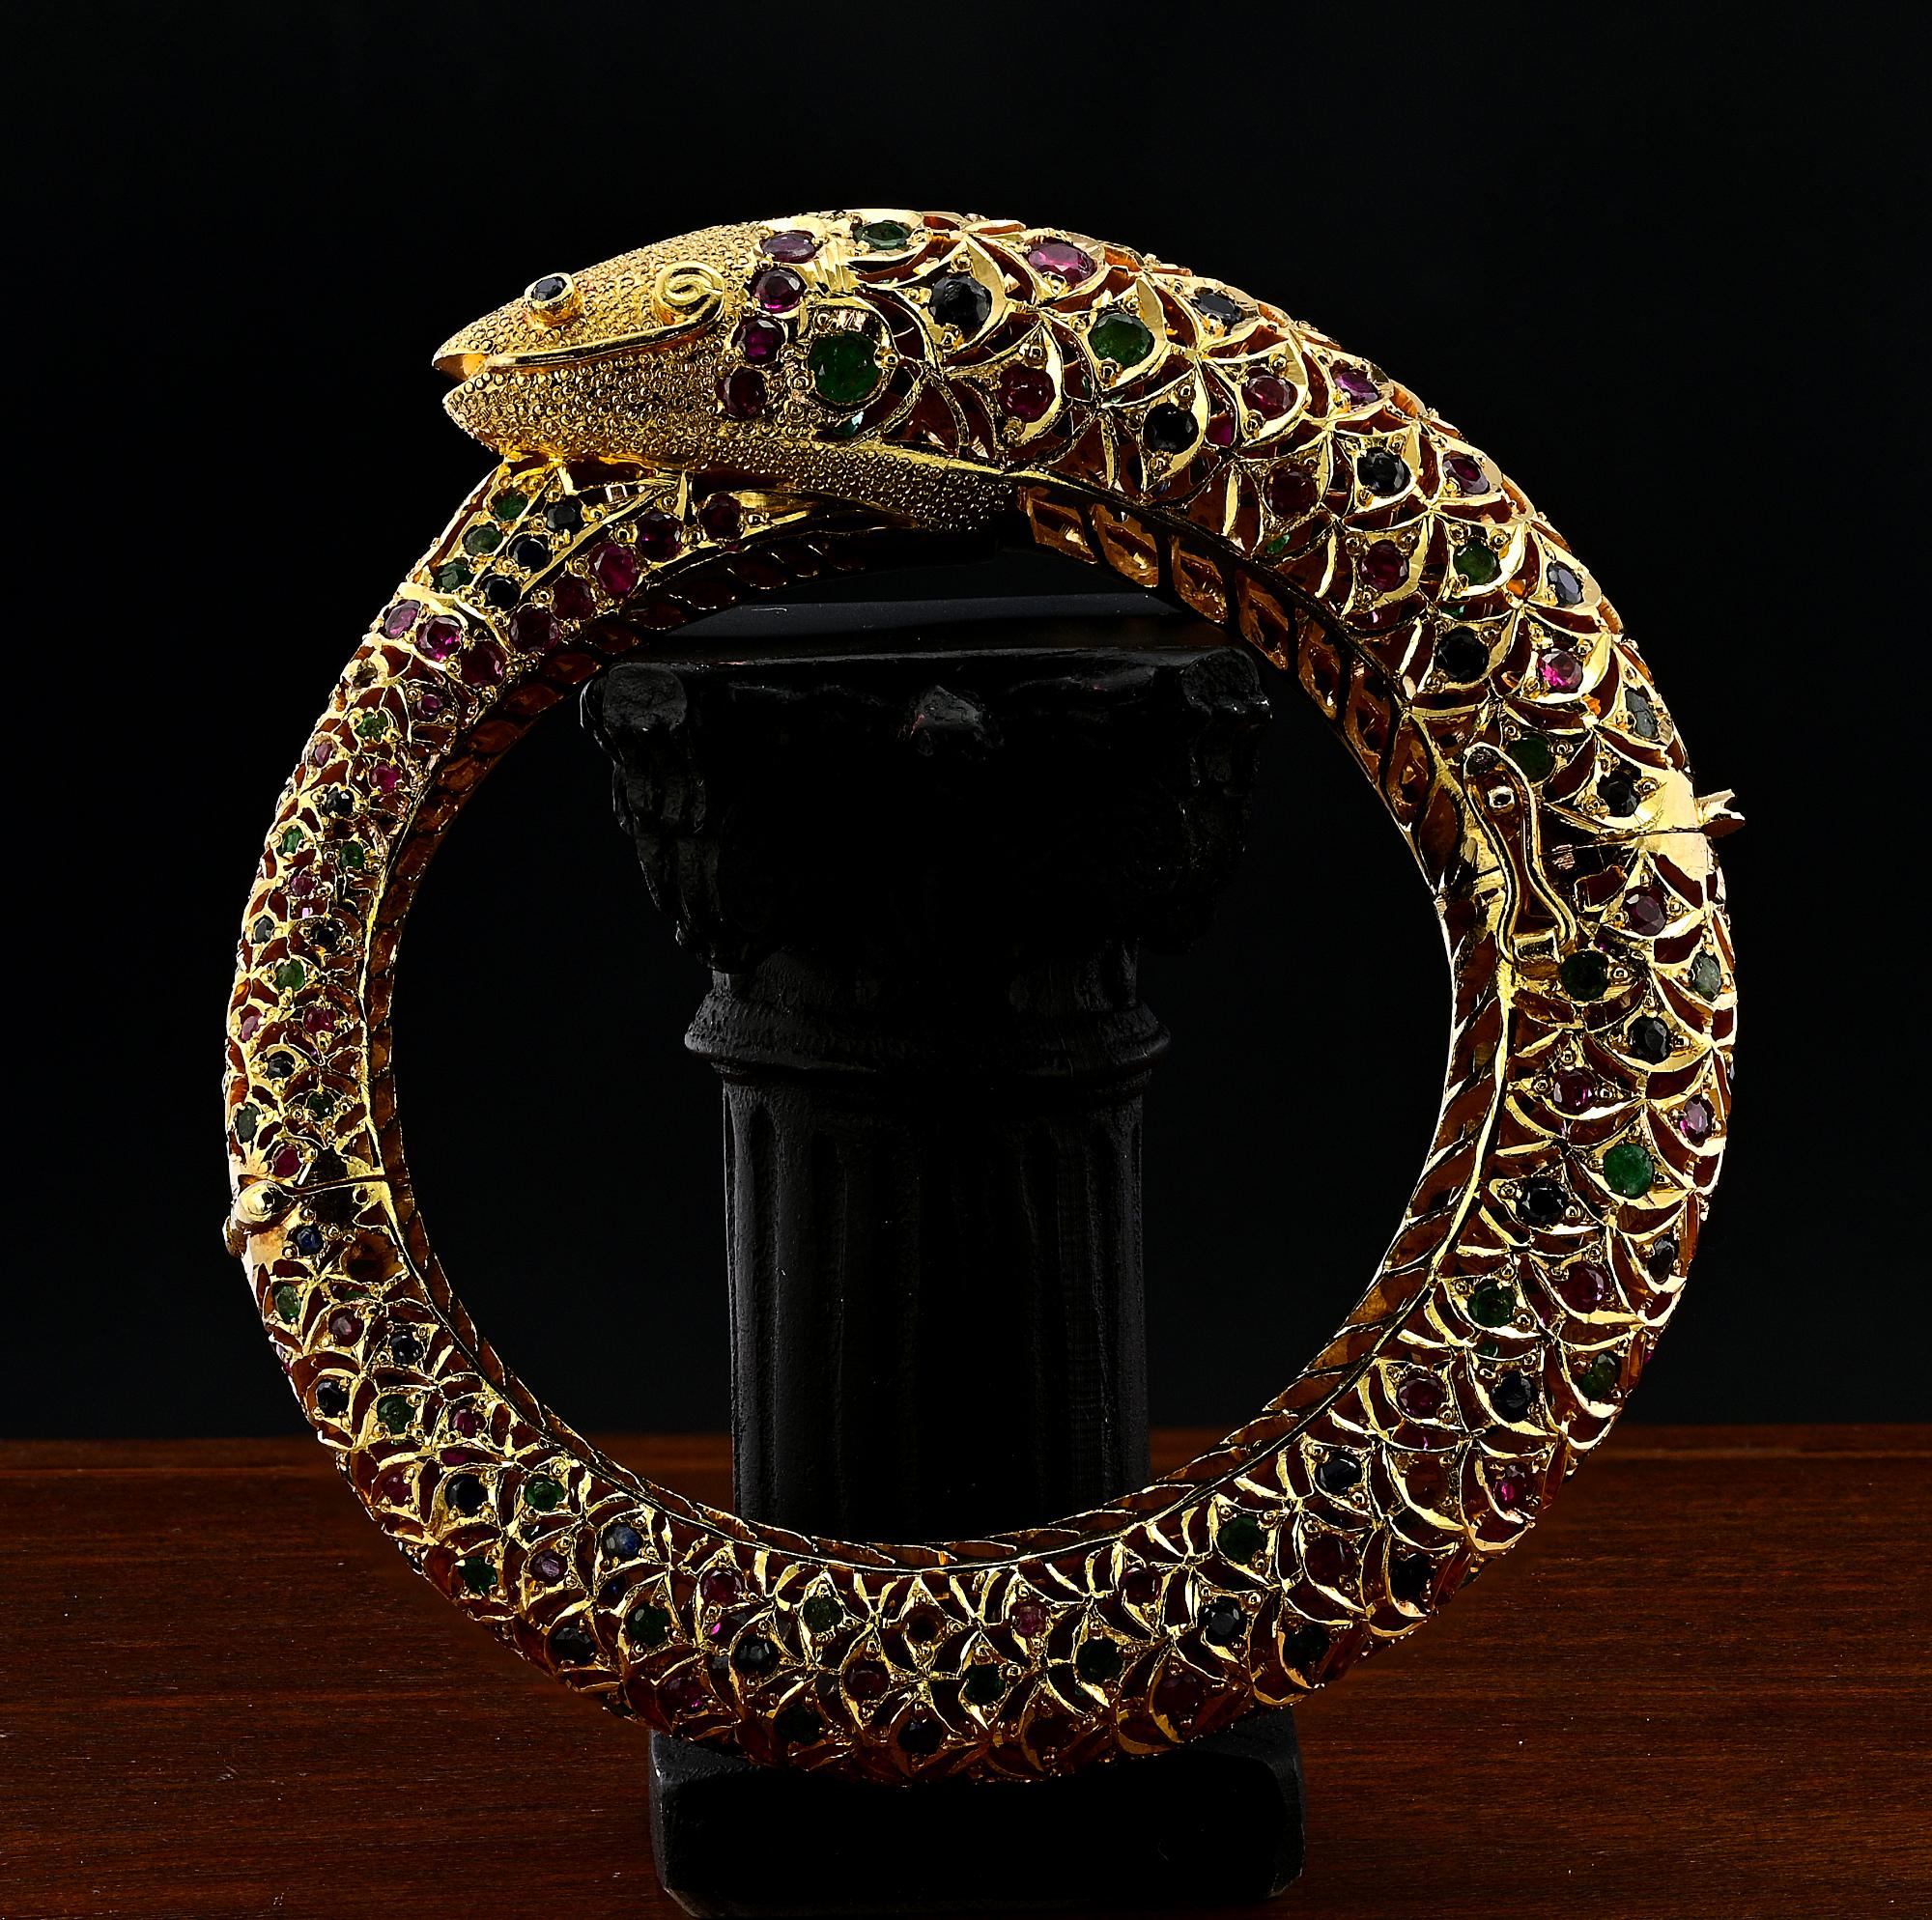 This outstanding vintage bangle is 1940 circa
Indian origin
Artfully hand crafted in an amazing workmanship in the shape of a coiled fish with fine pierced work simulating the fish scales over the main body leading to the fish head crossing the tail